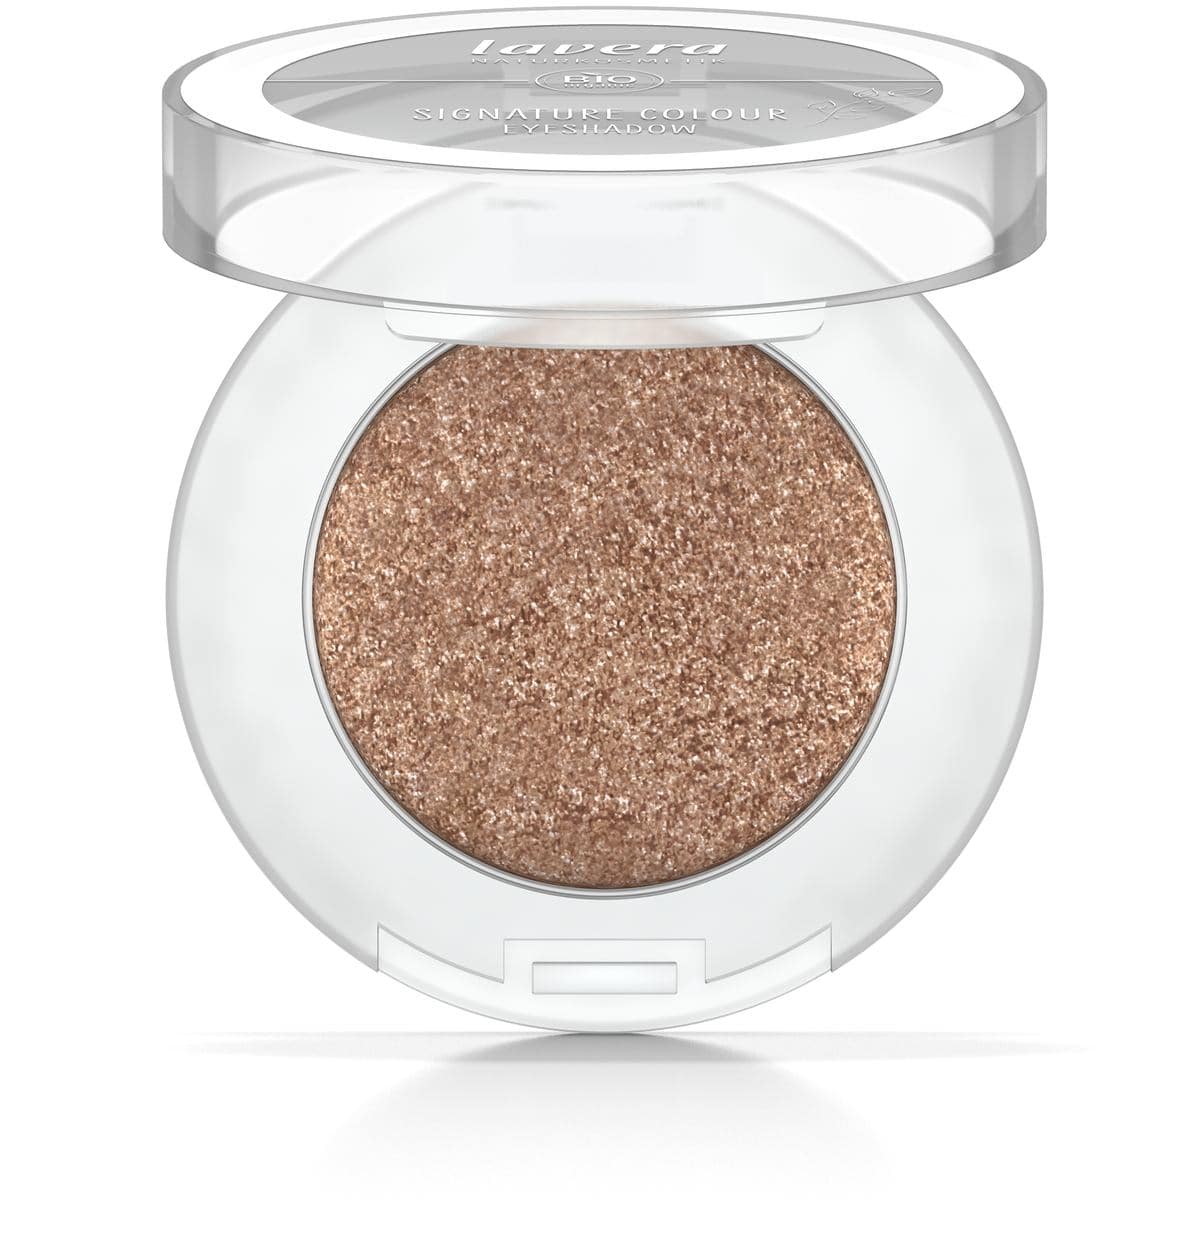 Signature Colour Eyeshadow -Space Gold 08